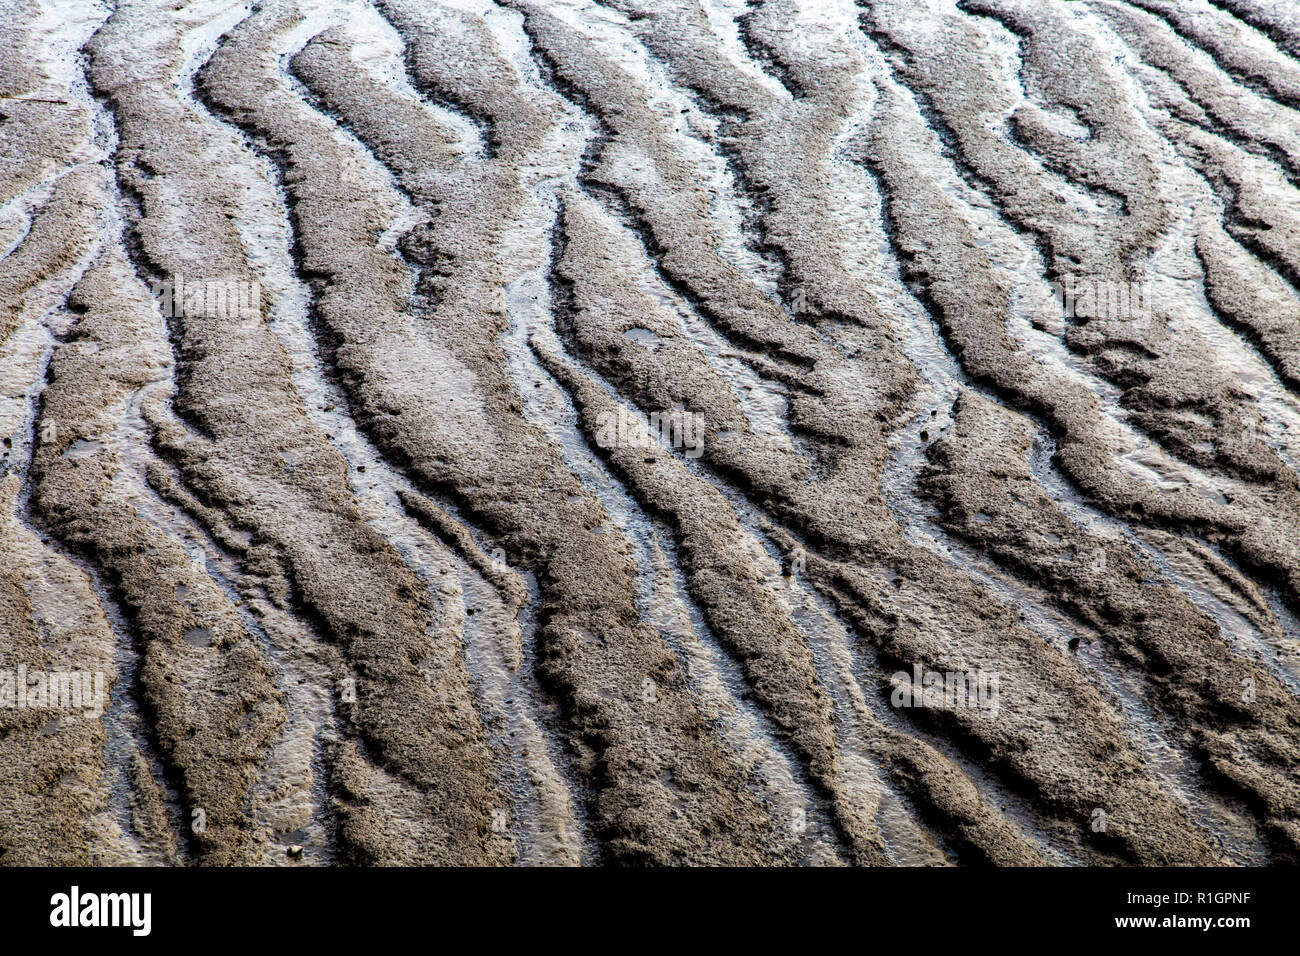 Ripple texture in the mud of a river shore at low tide, Thames River, London, UK Stock Photo